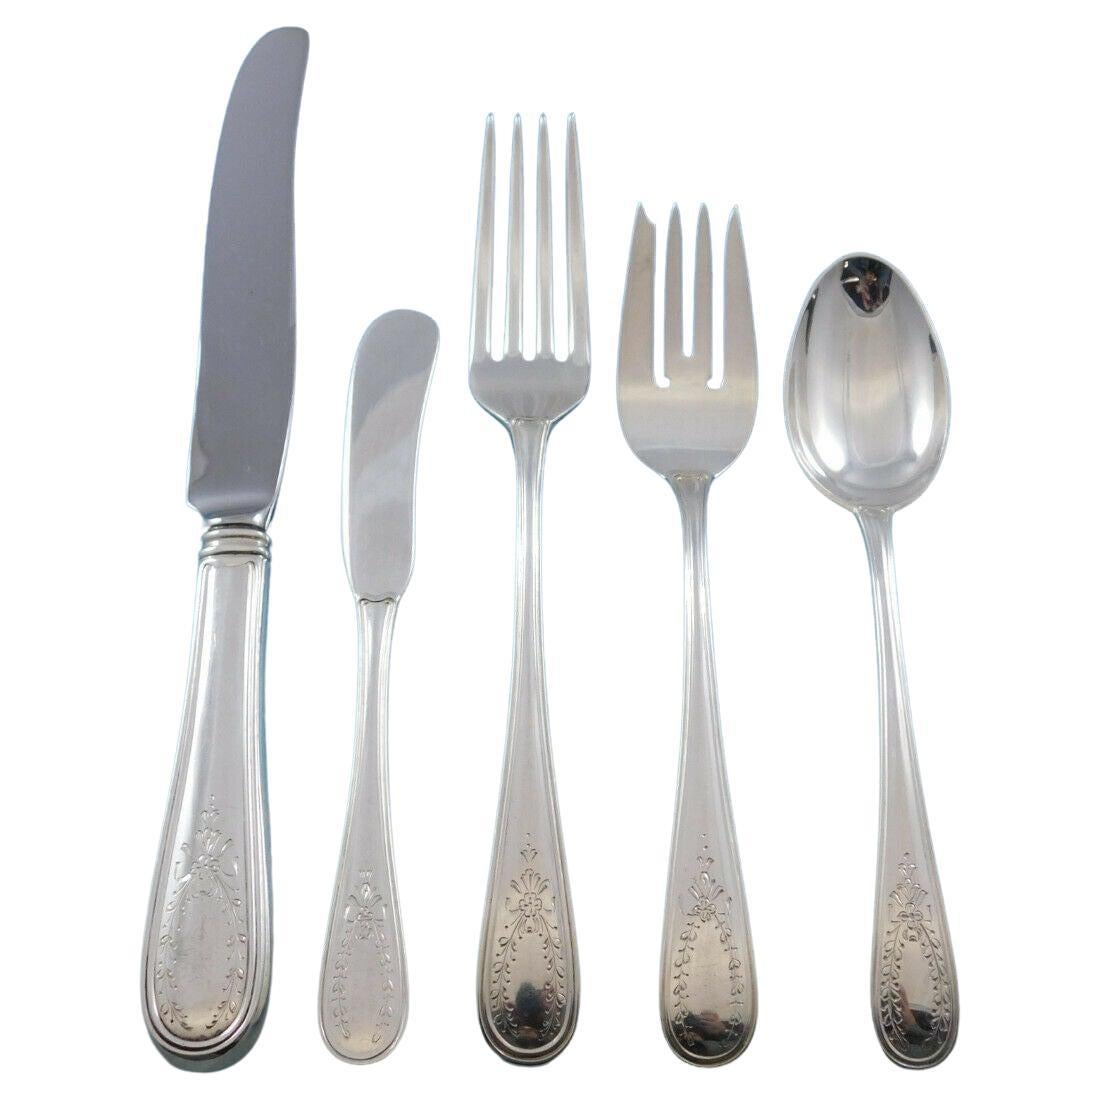 Louisburg Square AKA French Colonial Blackinton Sterling Silver Flatware Set 44p For Sale